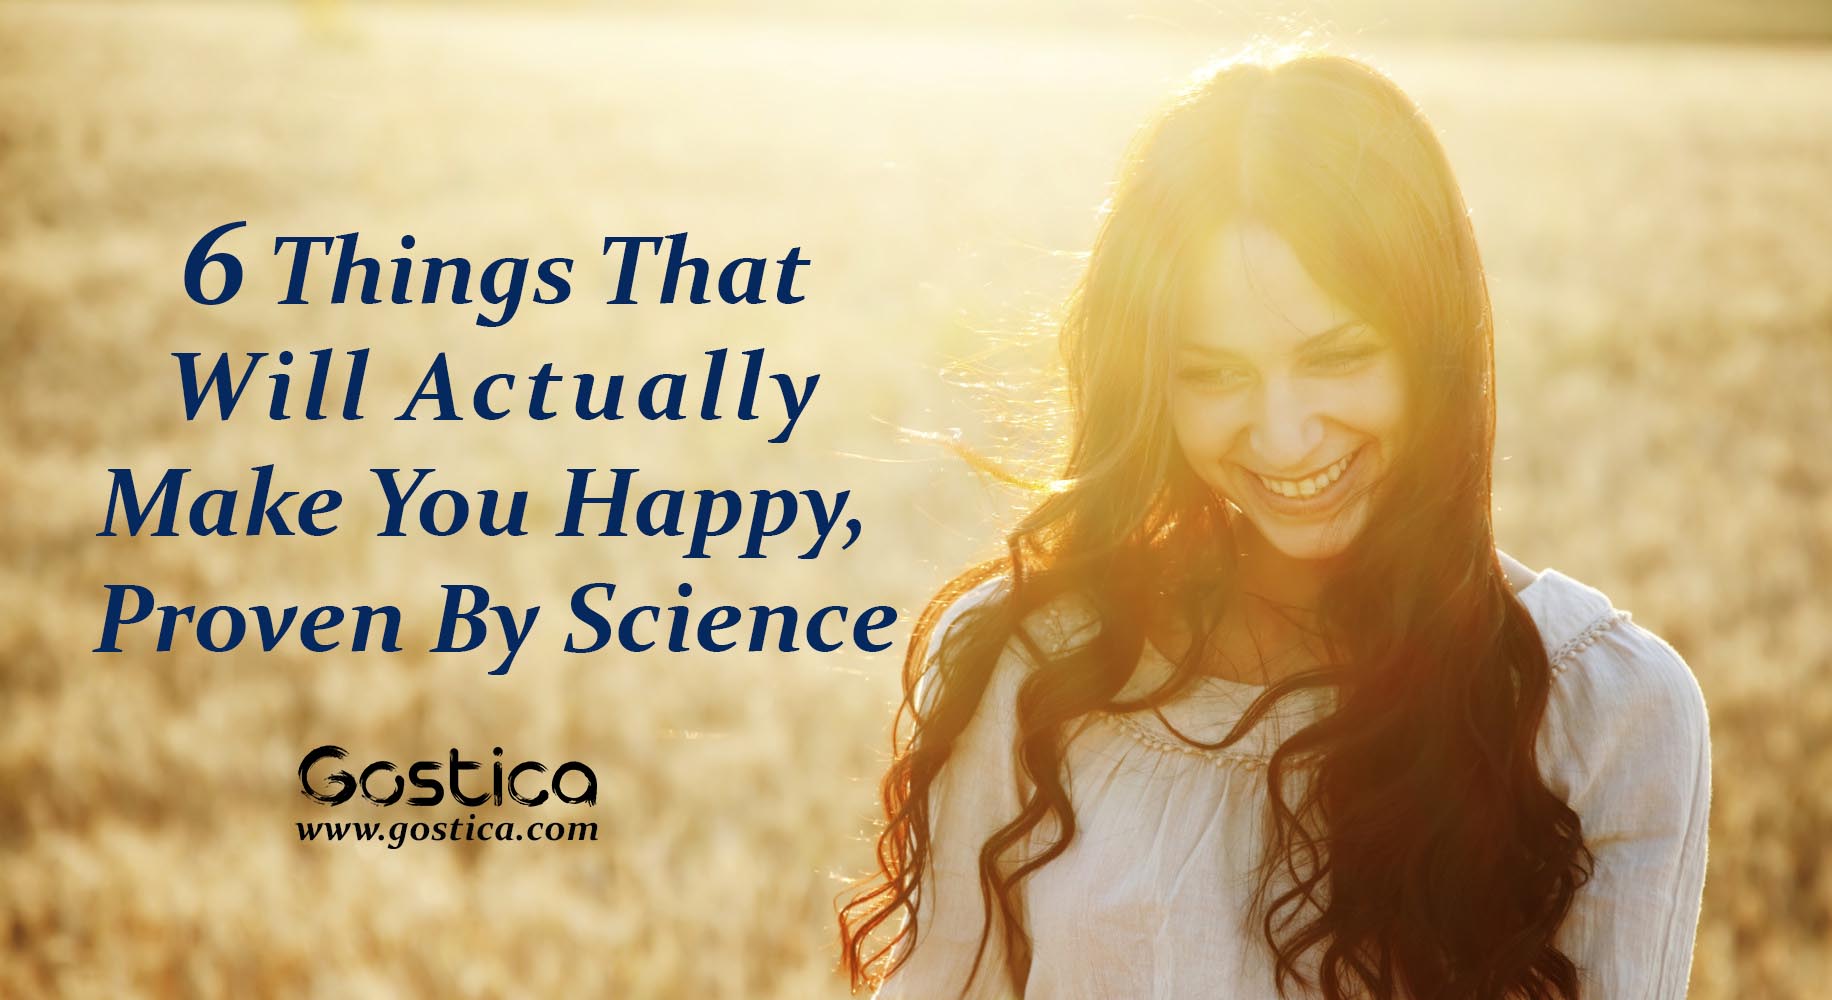 6-Things-That-Will-Actually-Make-You-Happy-Proven-By-Science.jpg